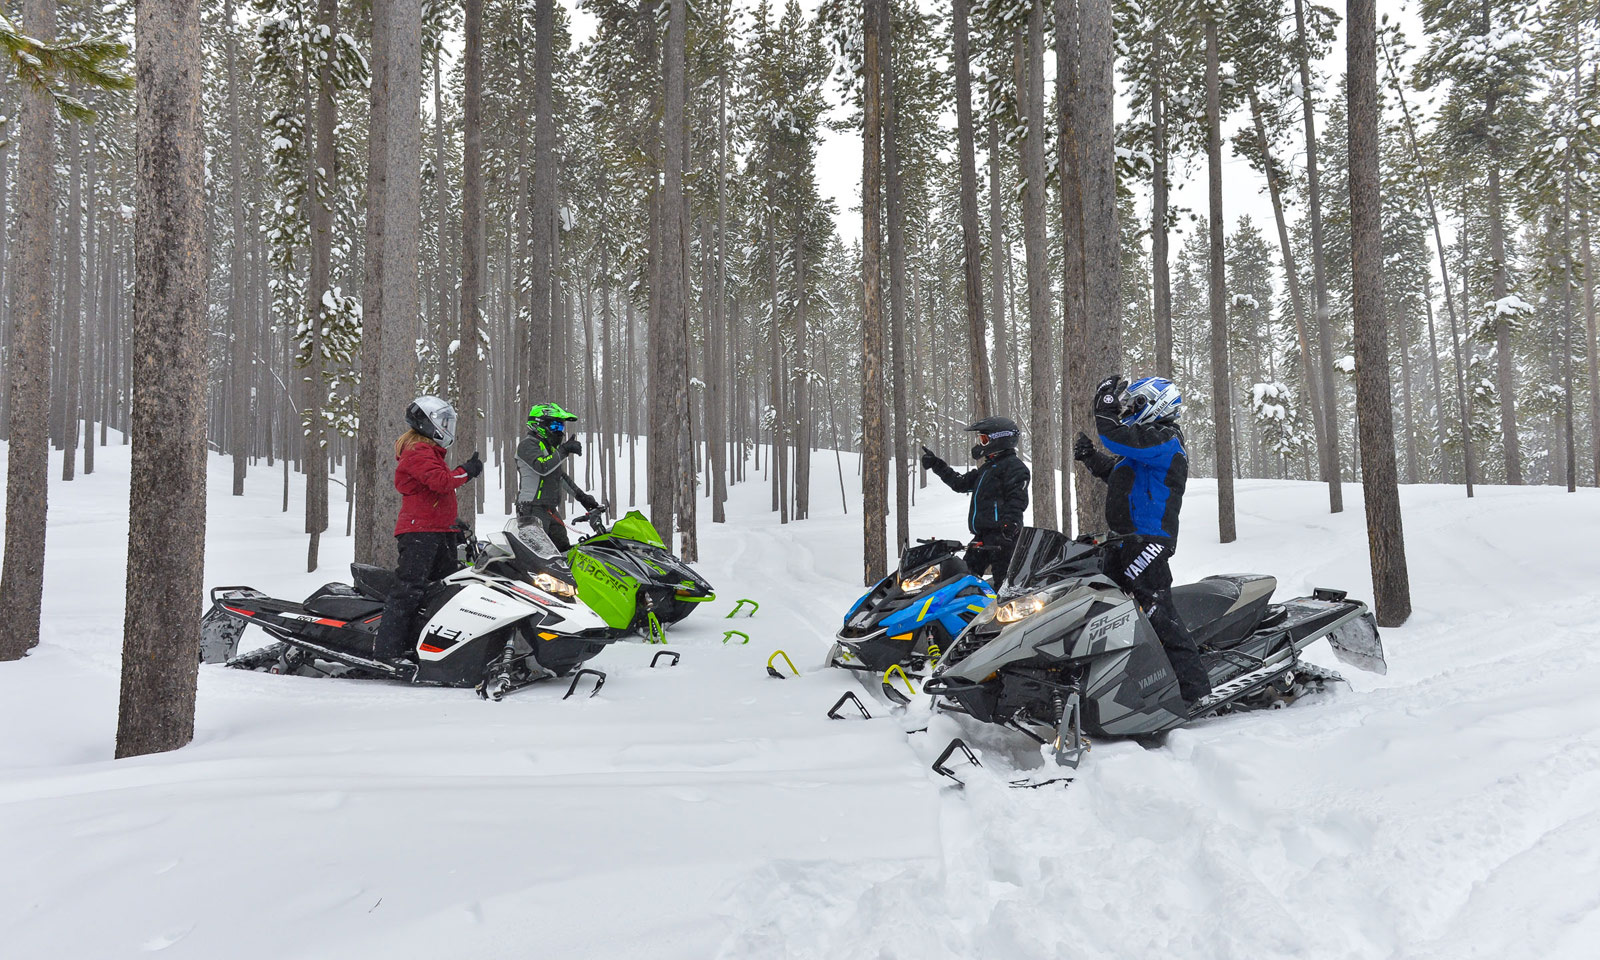 Snowmobilers gathered together as group